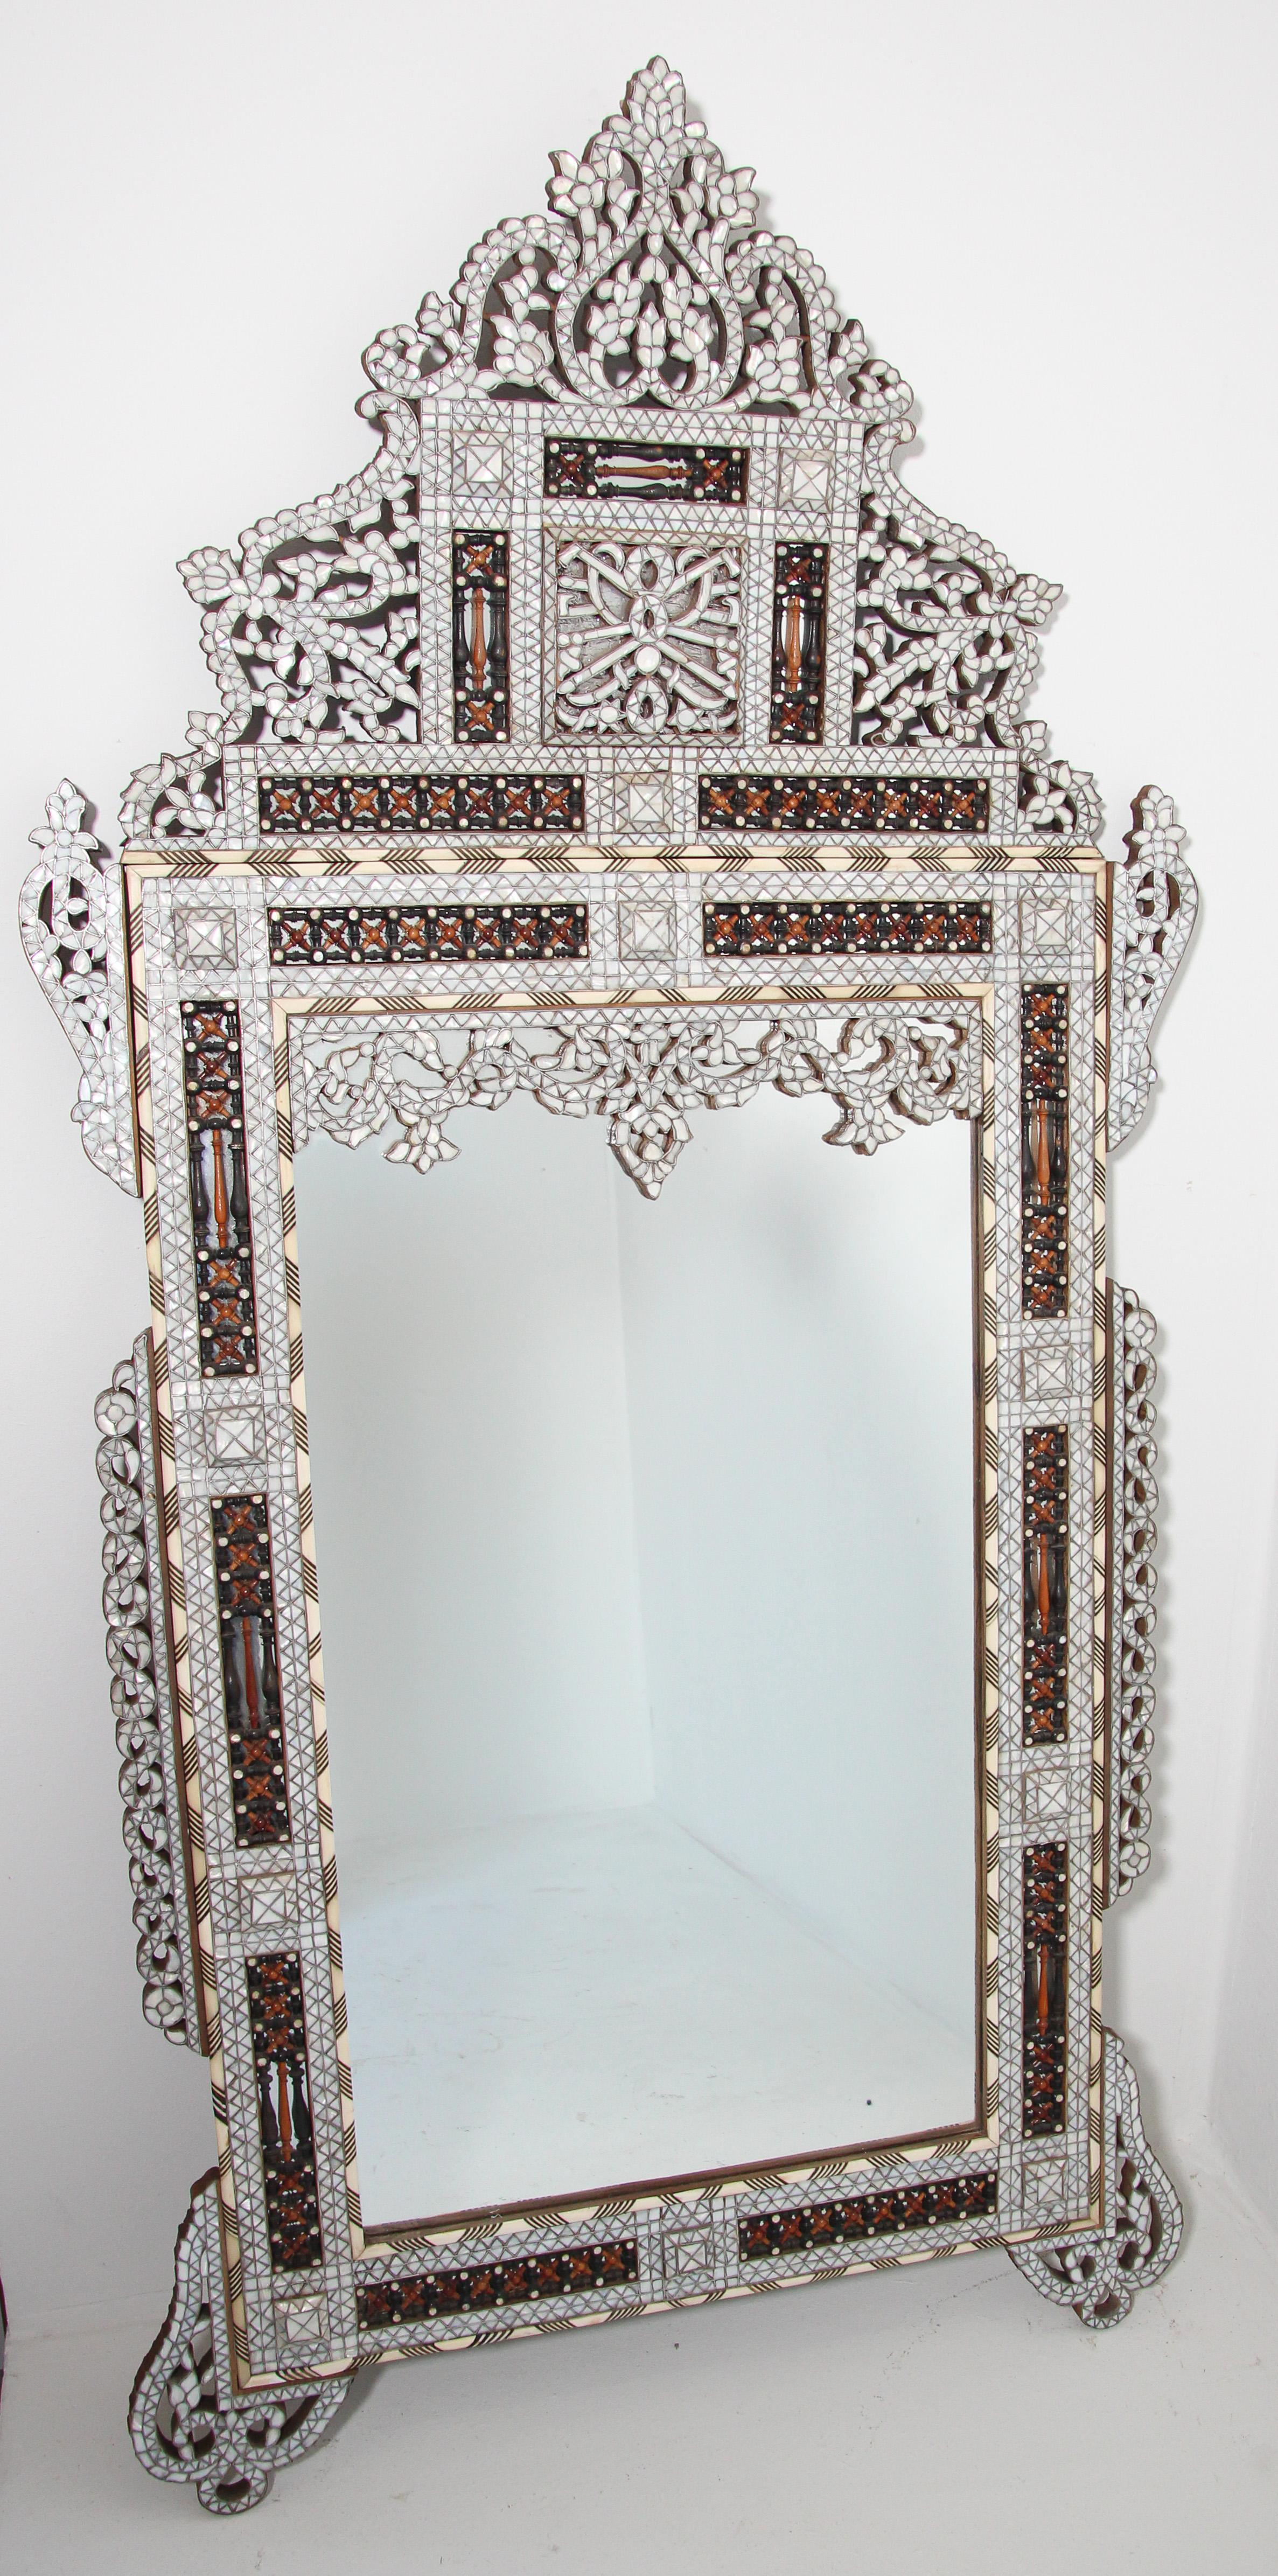 Levantine Middle Eastern Moorish Damascene Syrian white Mother of Pearl Inlaid antique Mirror, Late 19th Century.
White Mother of Pearl Inlaid Middle Eastern Syrian Mirror.
Antique Middle Eastern Moorish mirror in the Turkish Syrian Ottoman